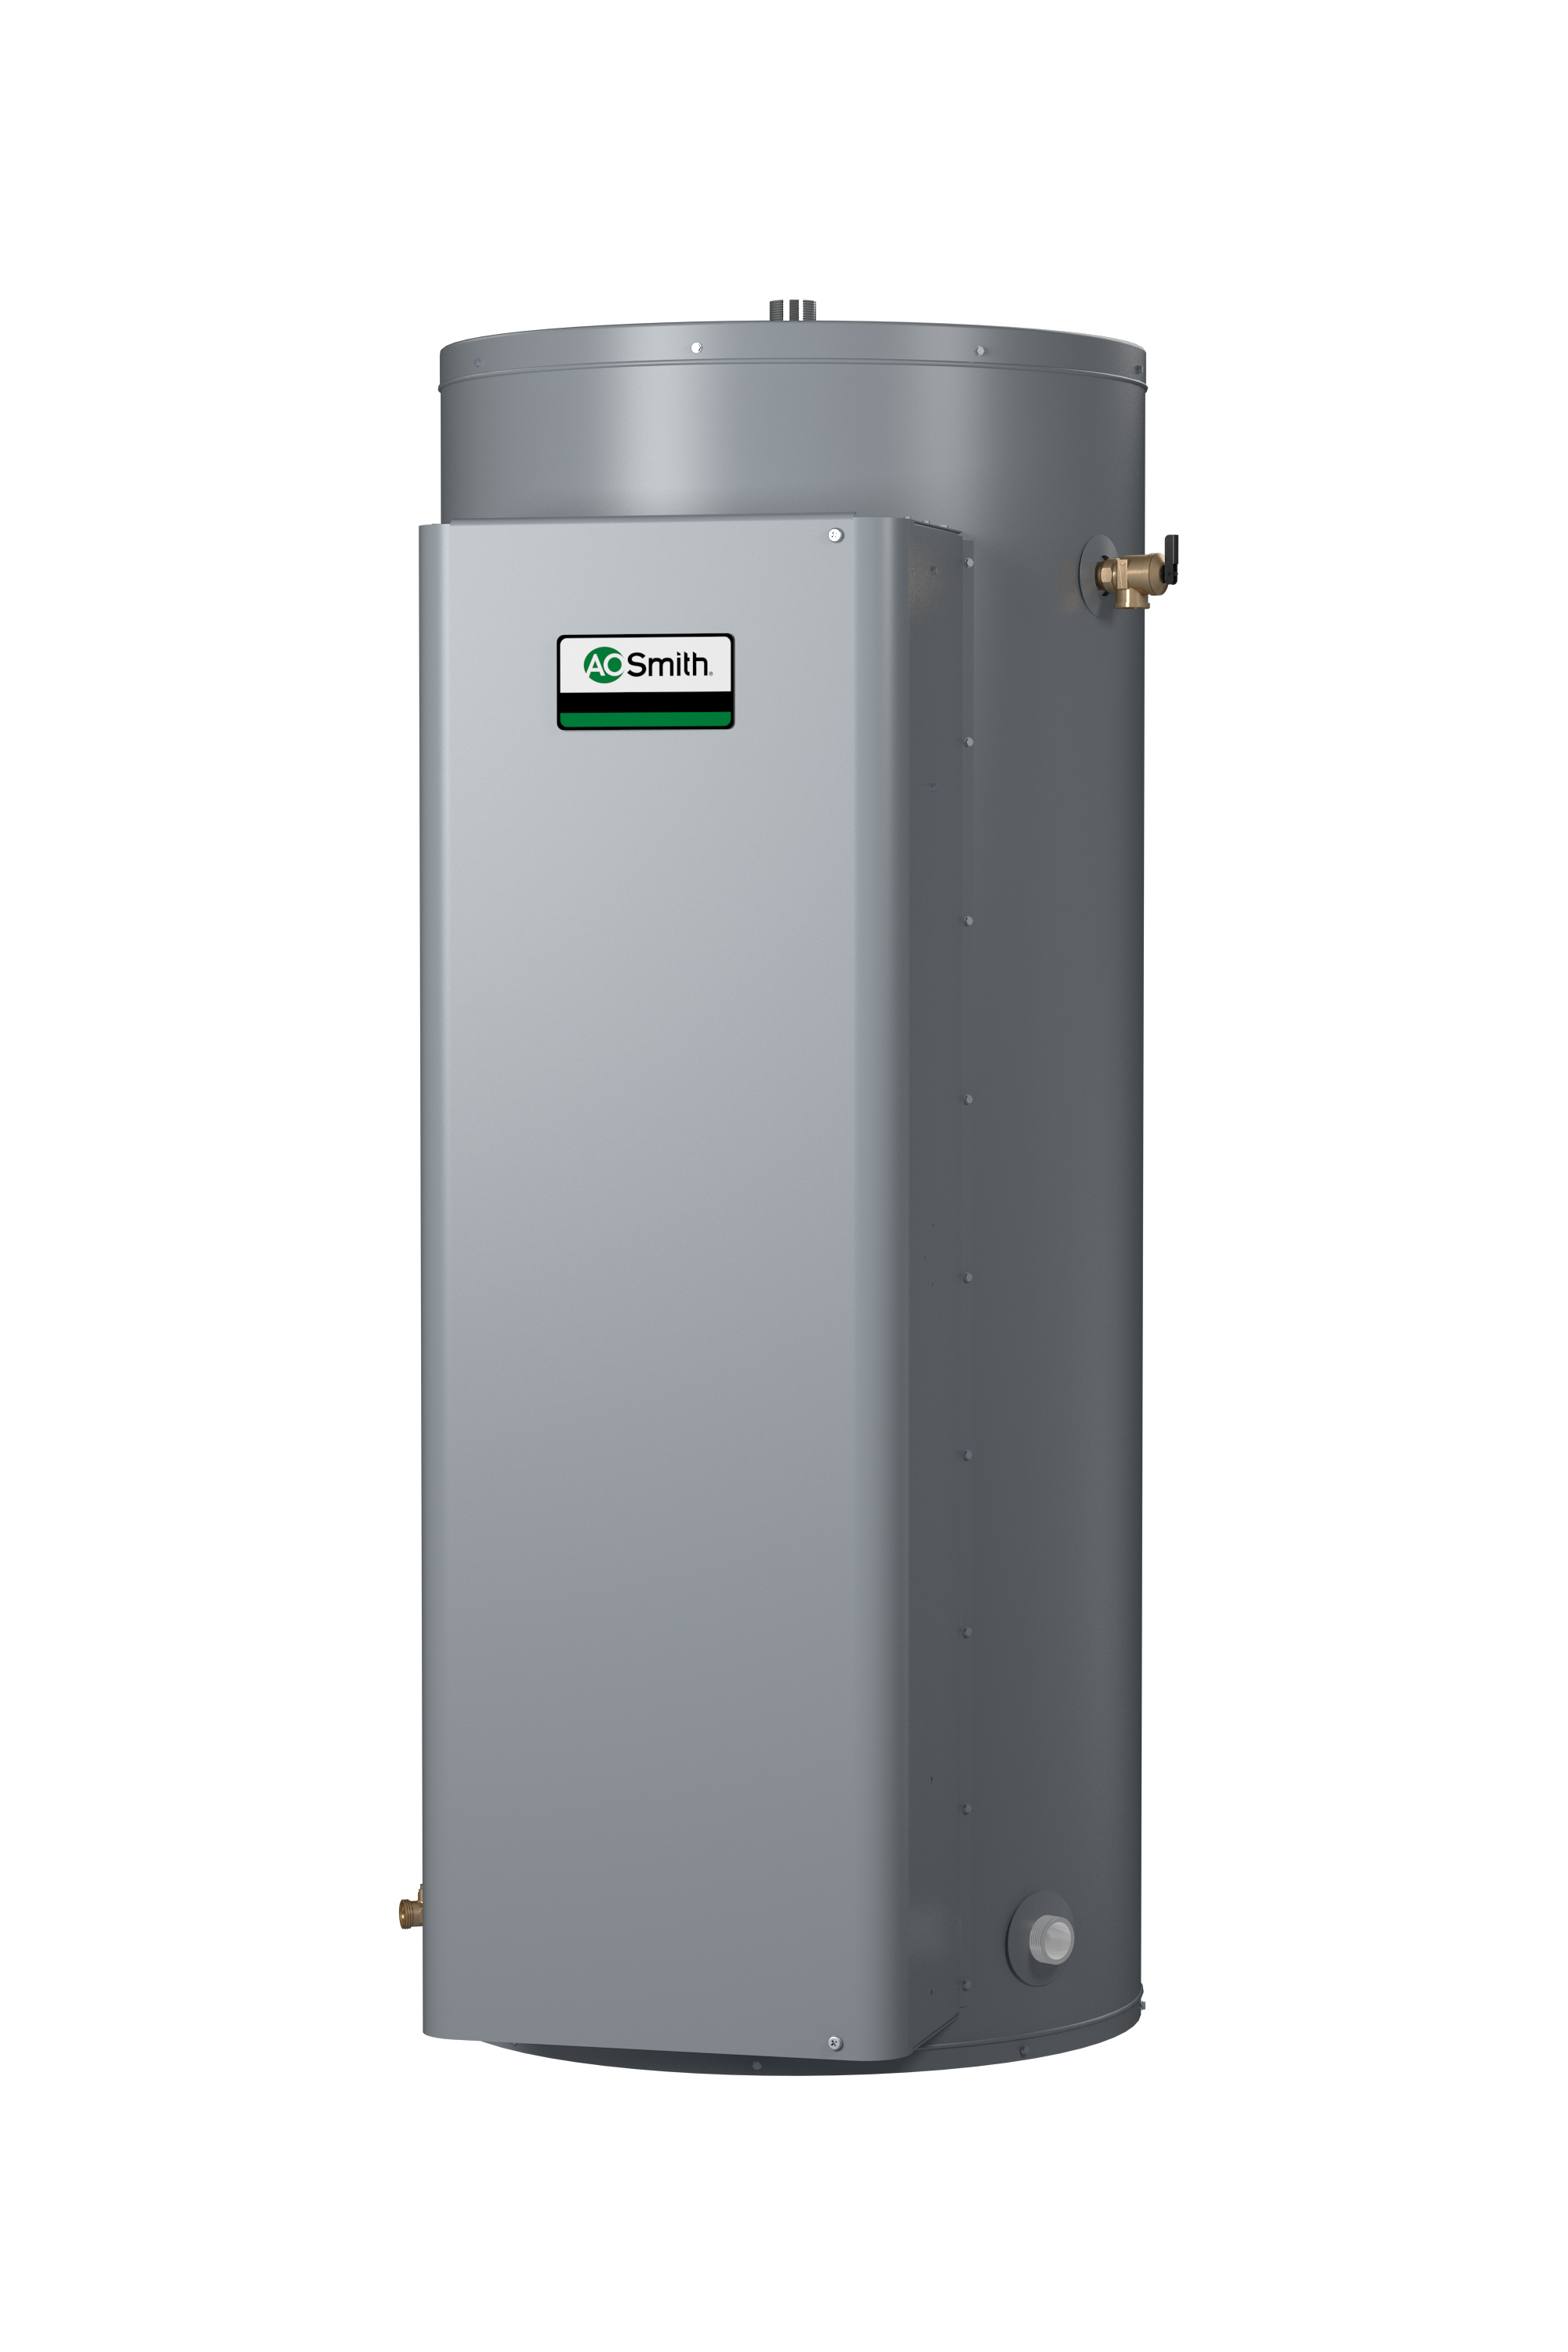 AO SMITH DRE-120-15, 119 GALLON, 15.0KW, 240 VOLT, 62.5 AMPS, 1 PHASE, 3 ELEMENT, COMMERCIAL ELECTRIC WATER HEATER, GOLD SERIES